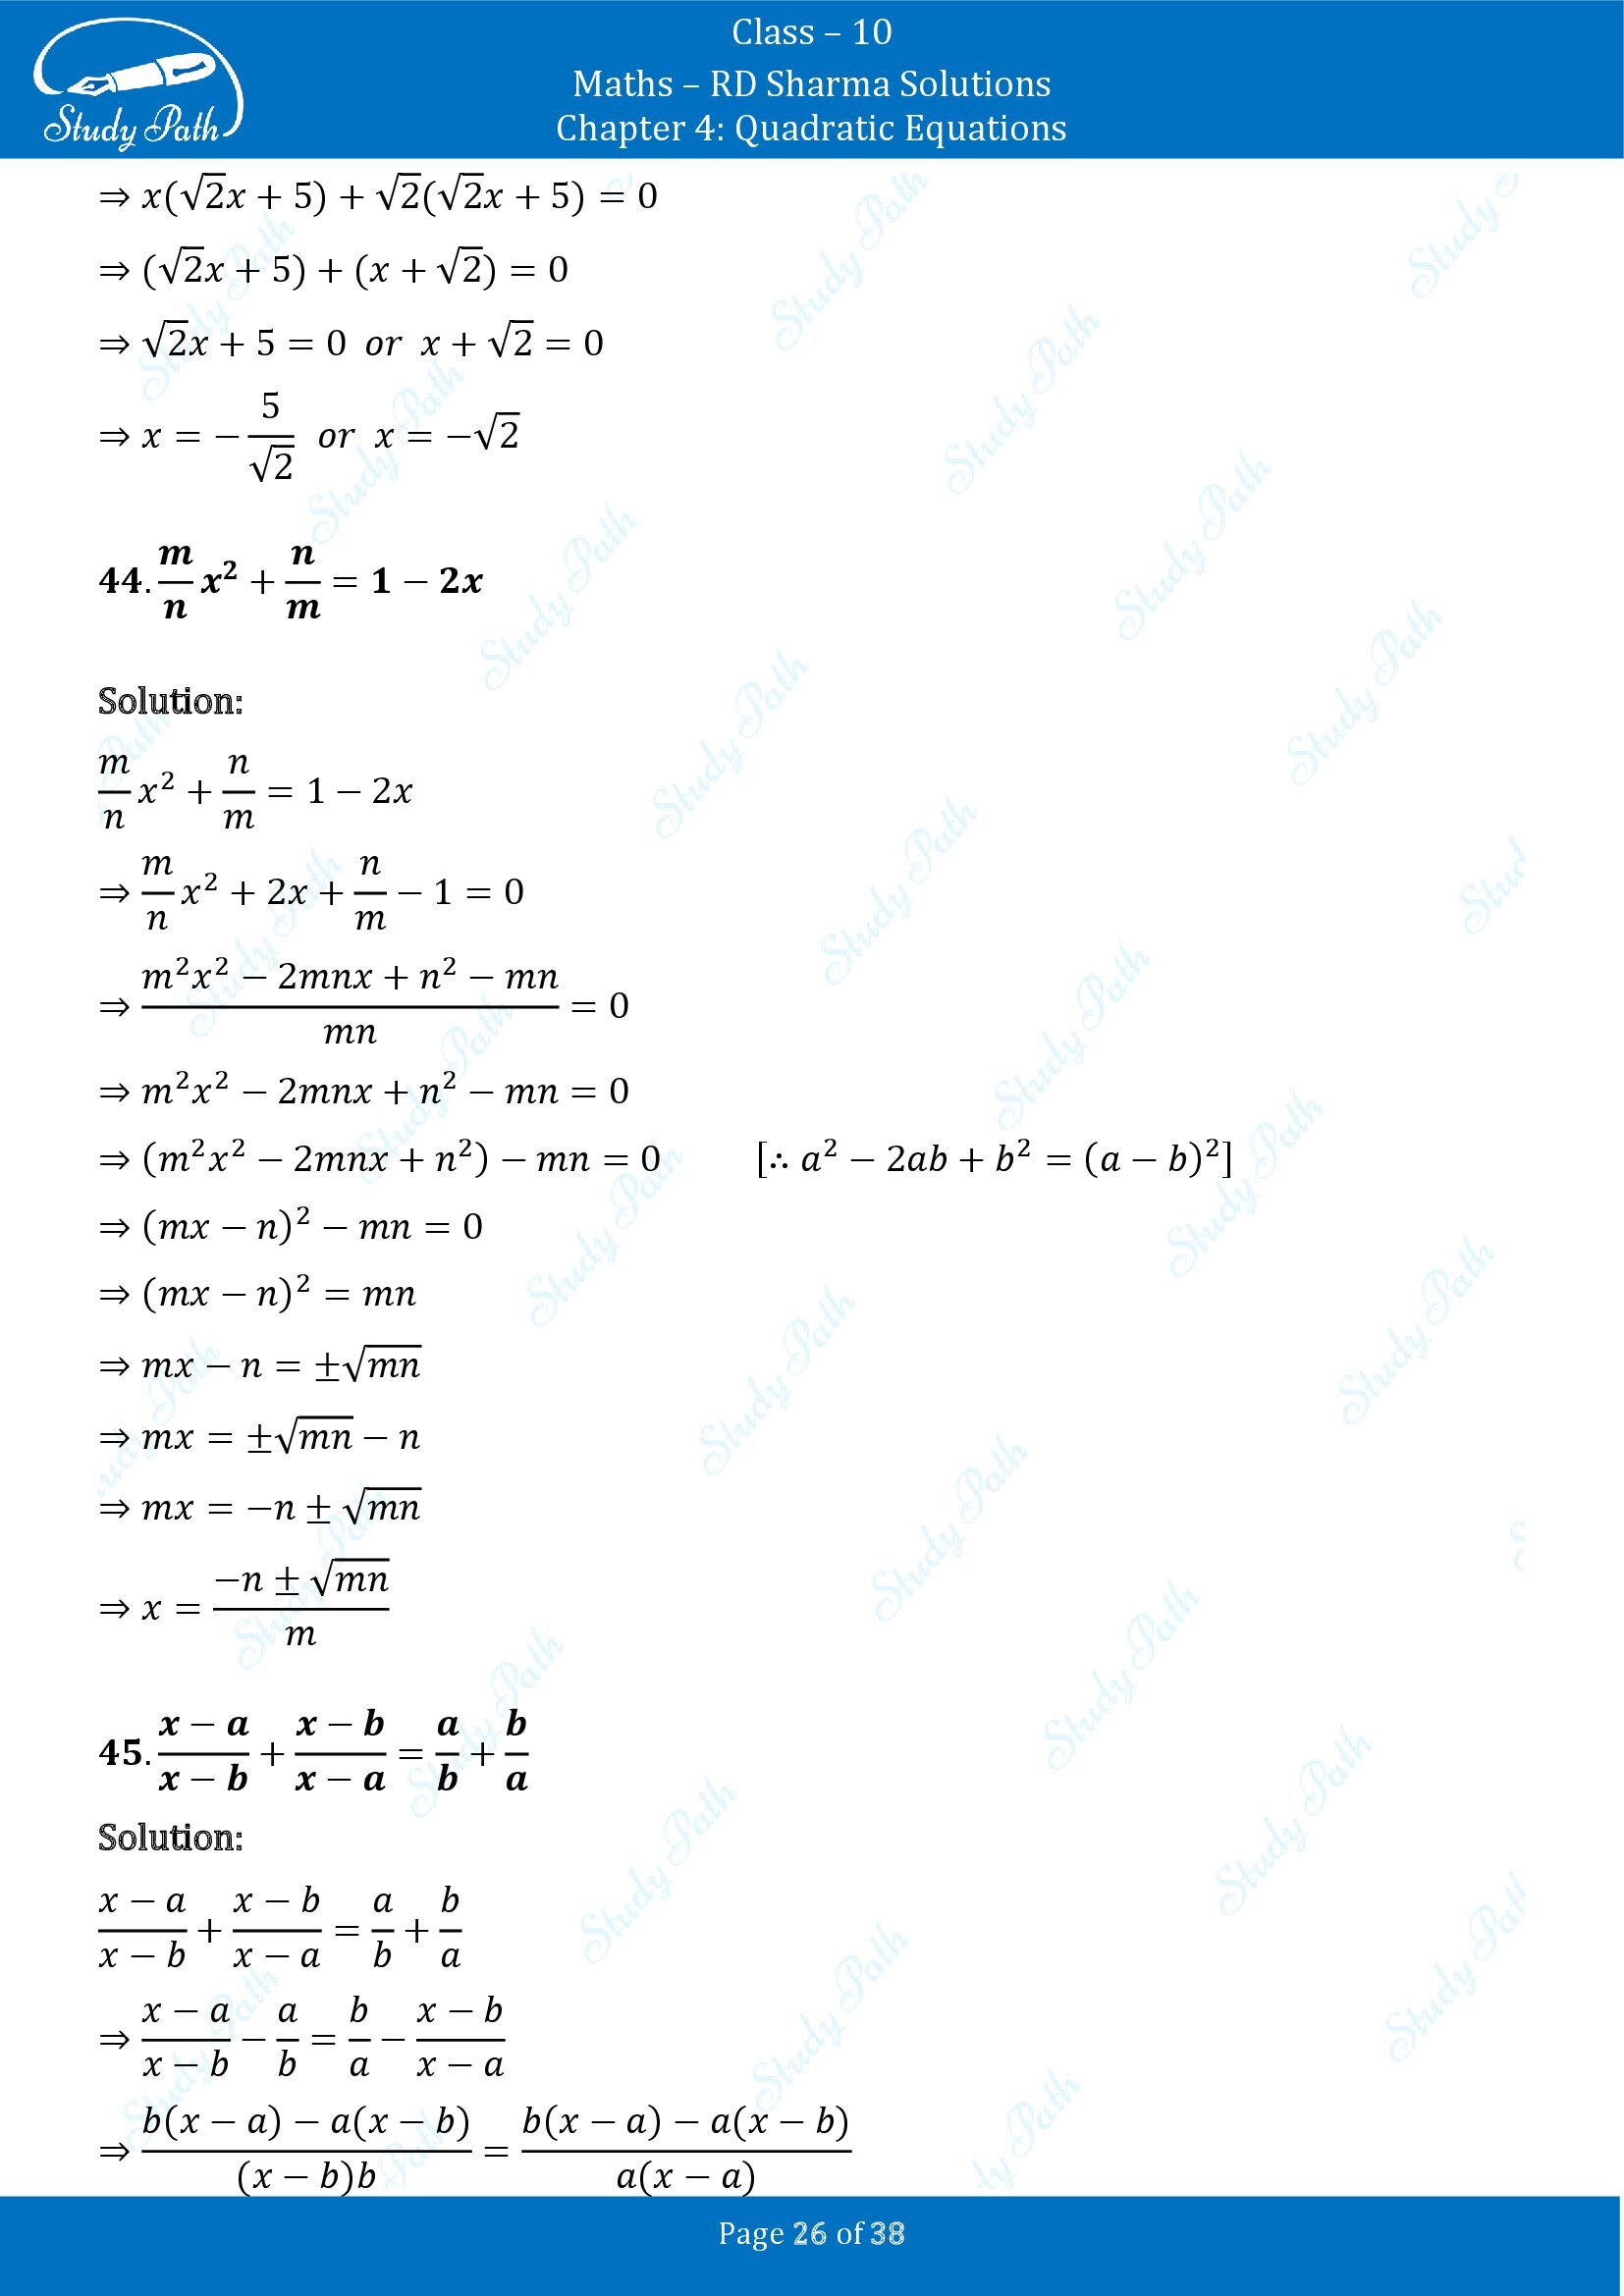 RD Sharma Solutions Class 10 Chapter 4 Quadratic Equations Exercise 4.3 00026